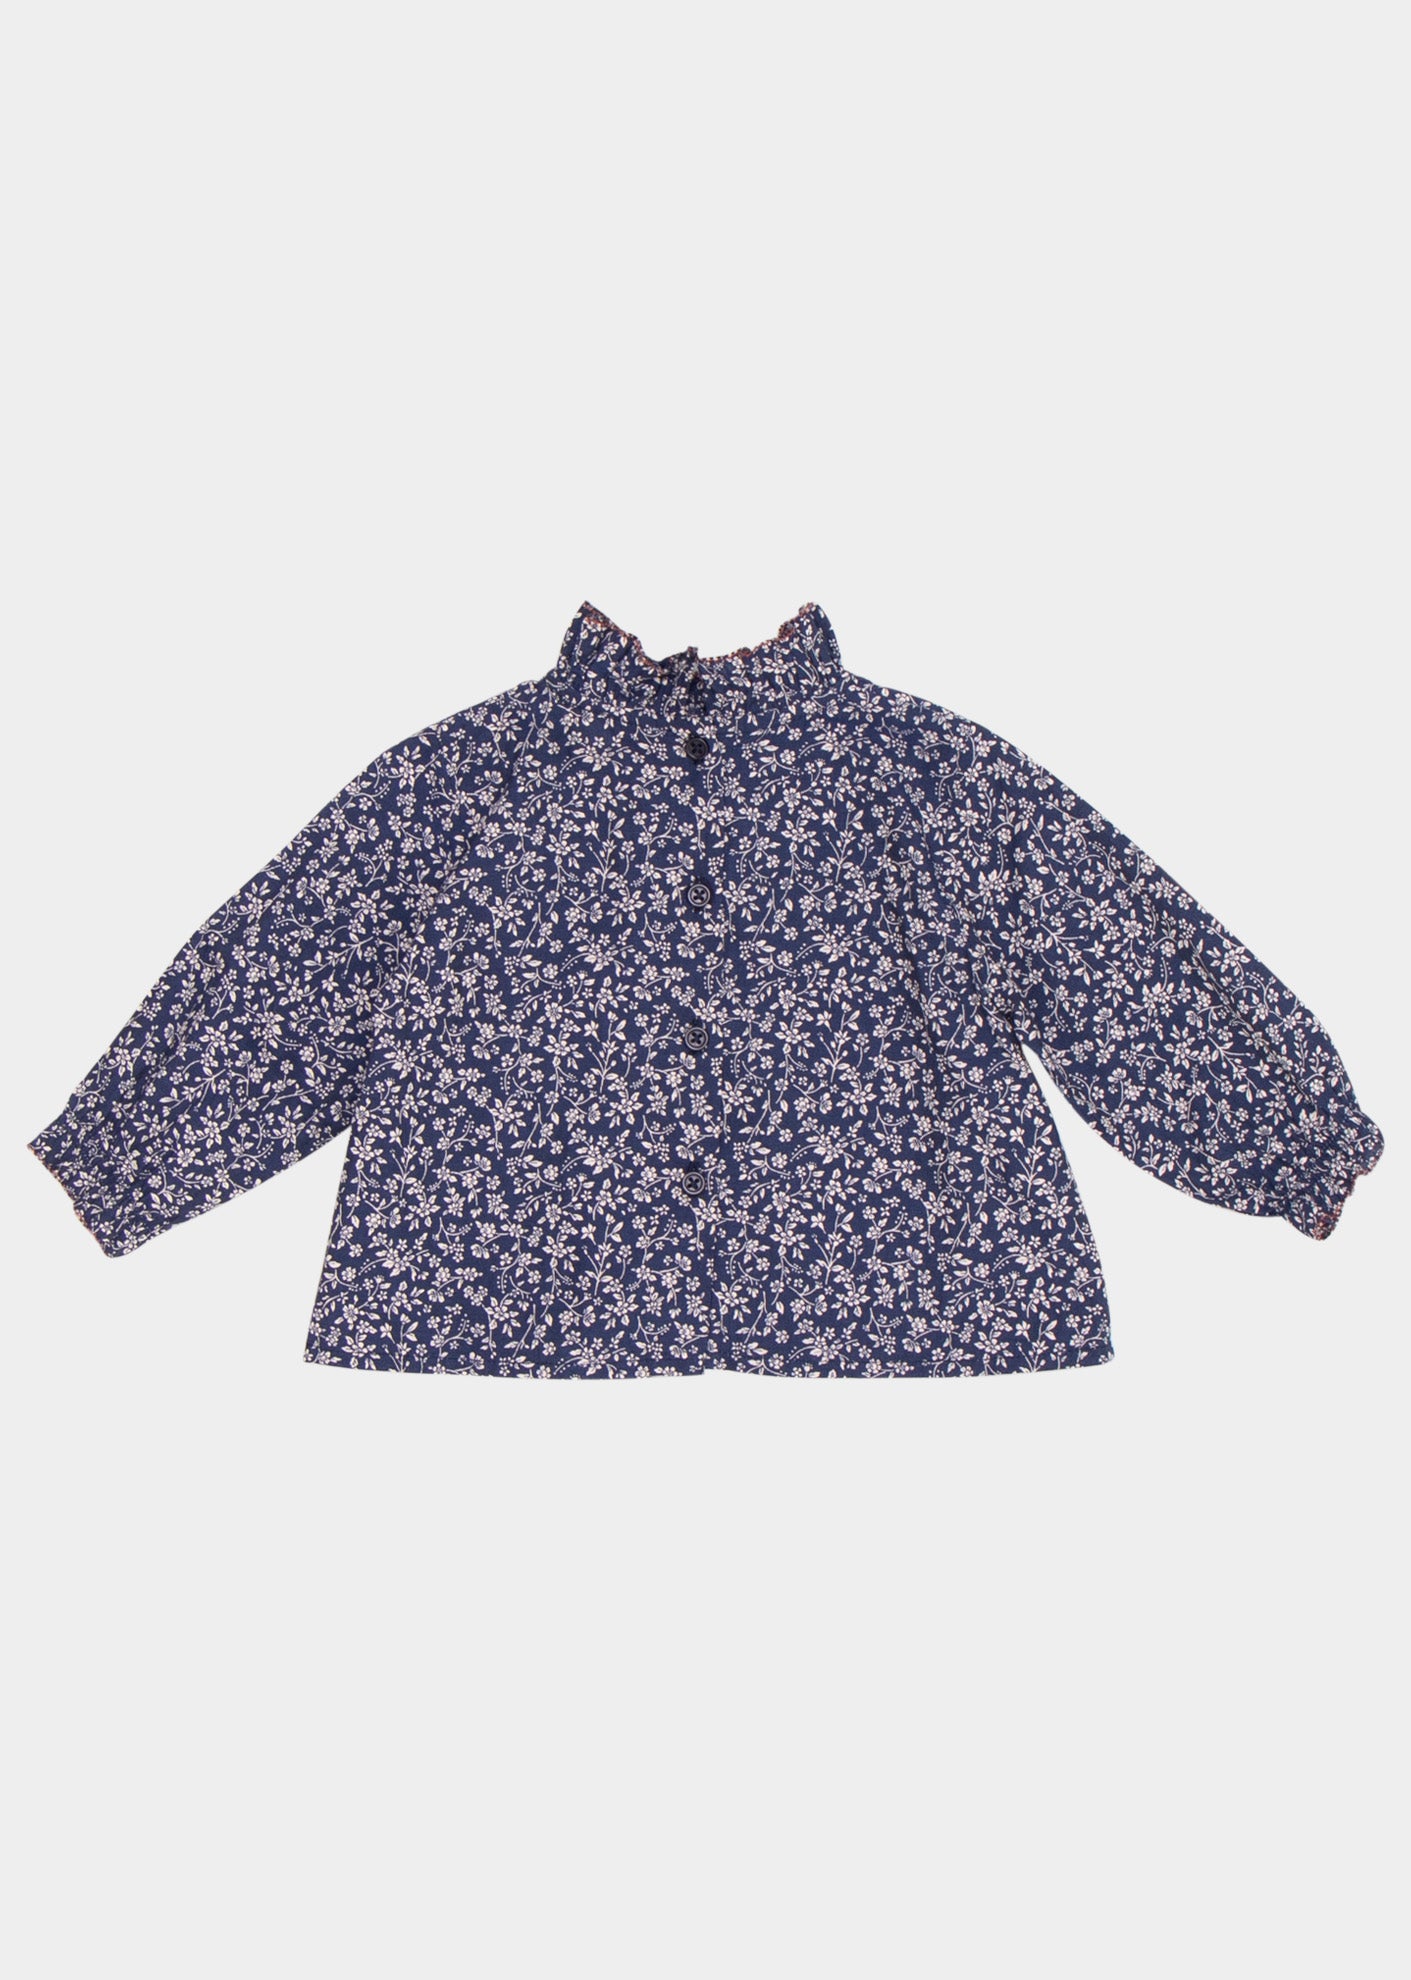 AMICIA BABY BLOUSE - NAVY FLORAL